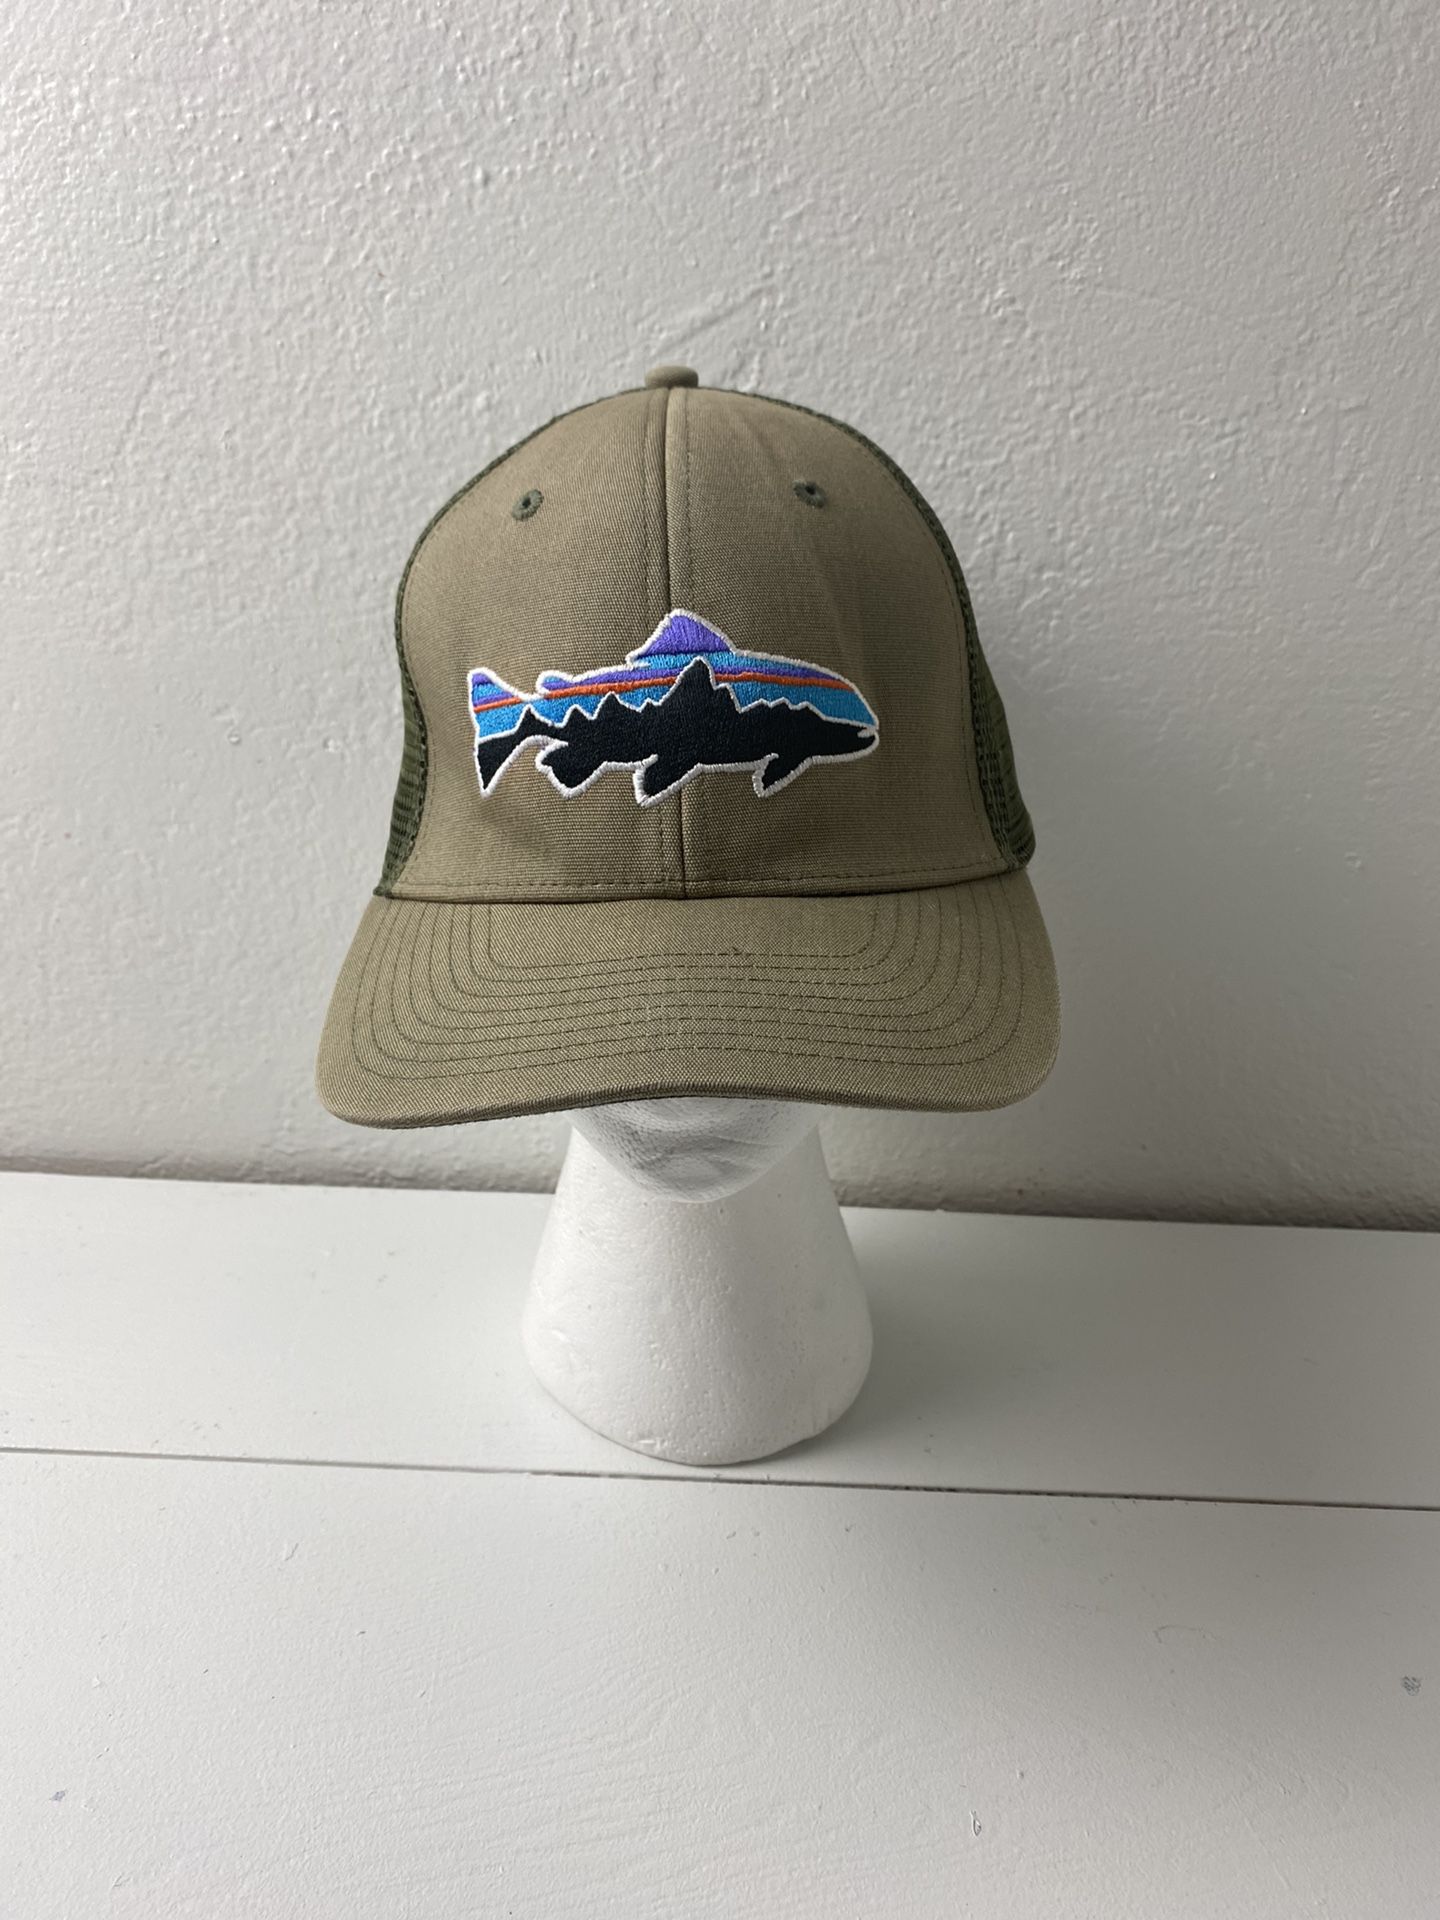 Patagonia Fitz Roy Trout Trucker Hat - Weathered Stone - Very good condition